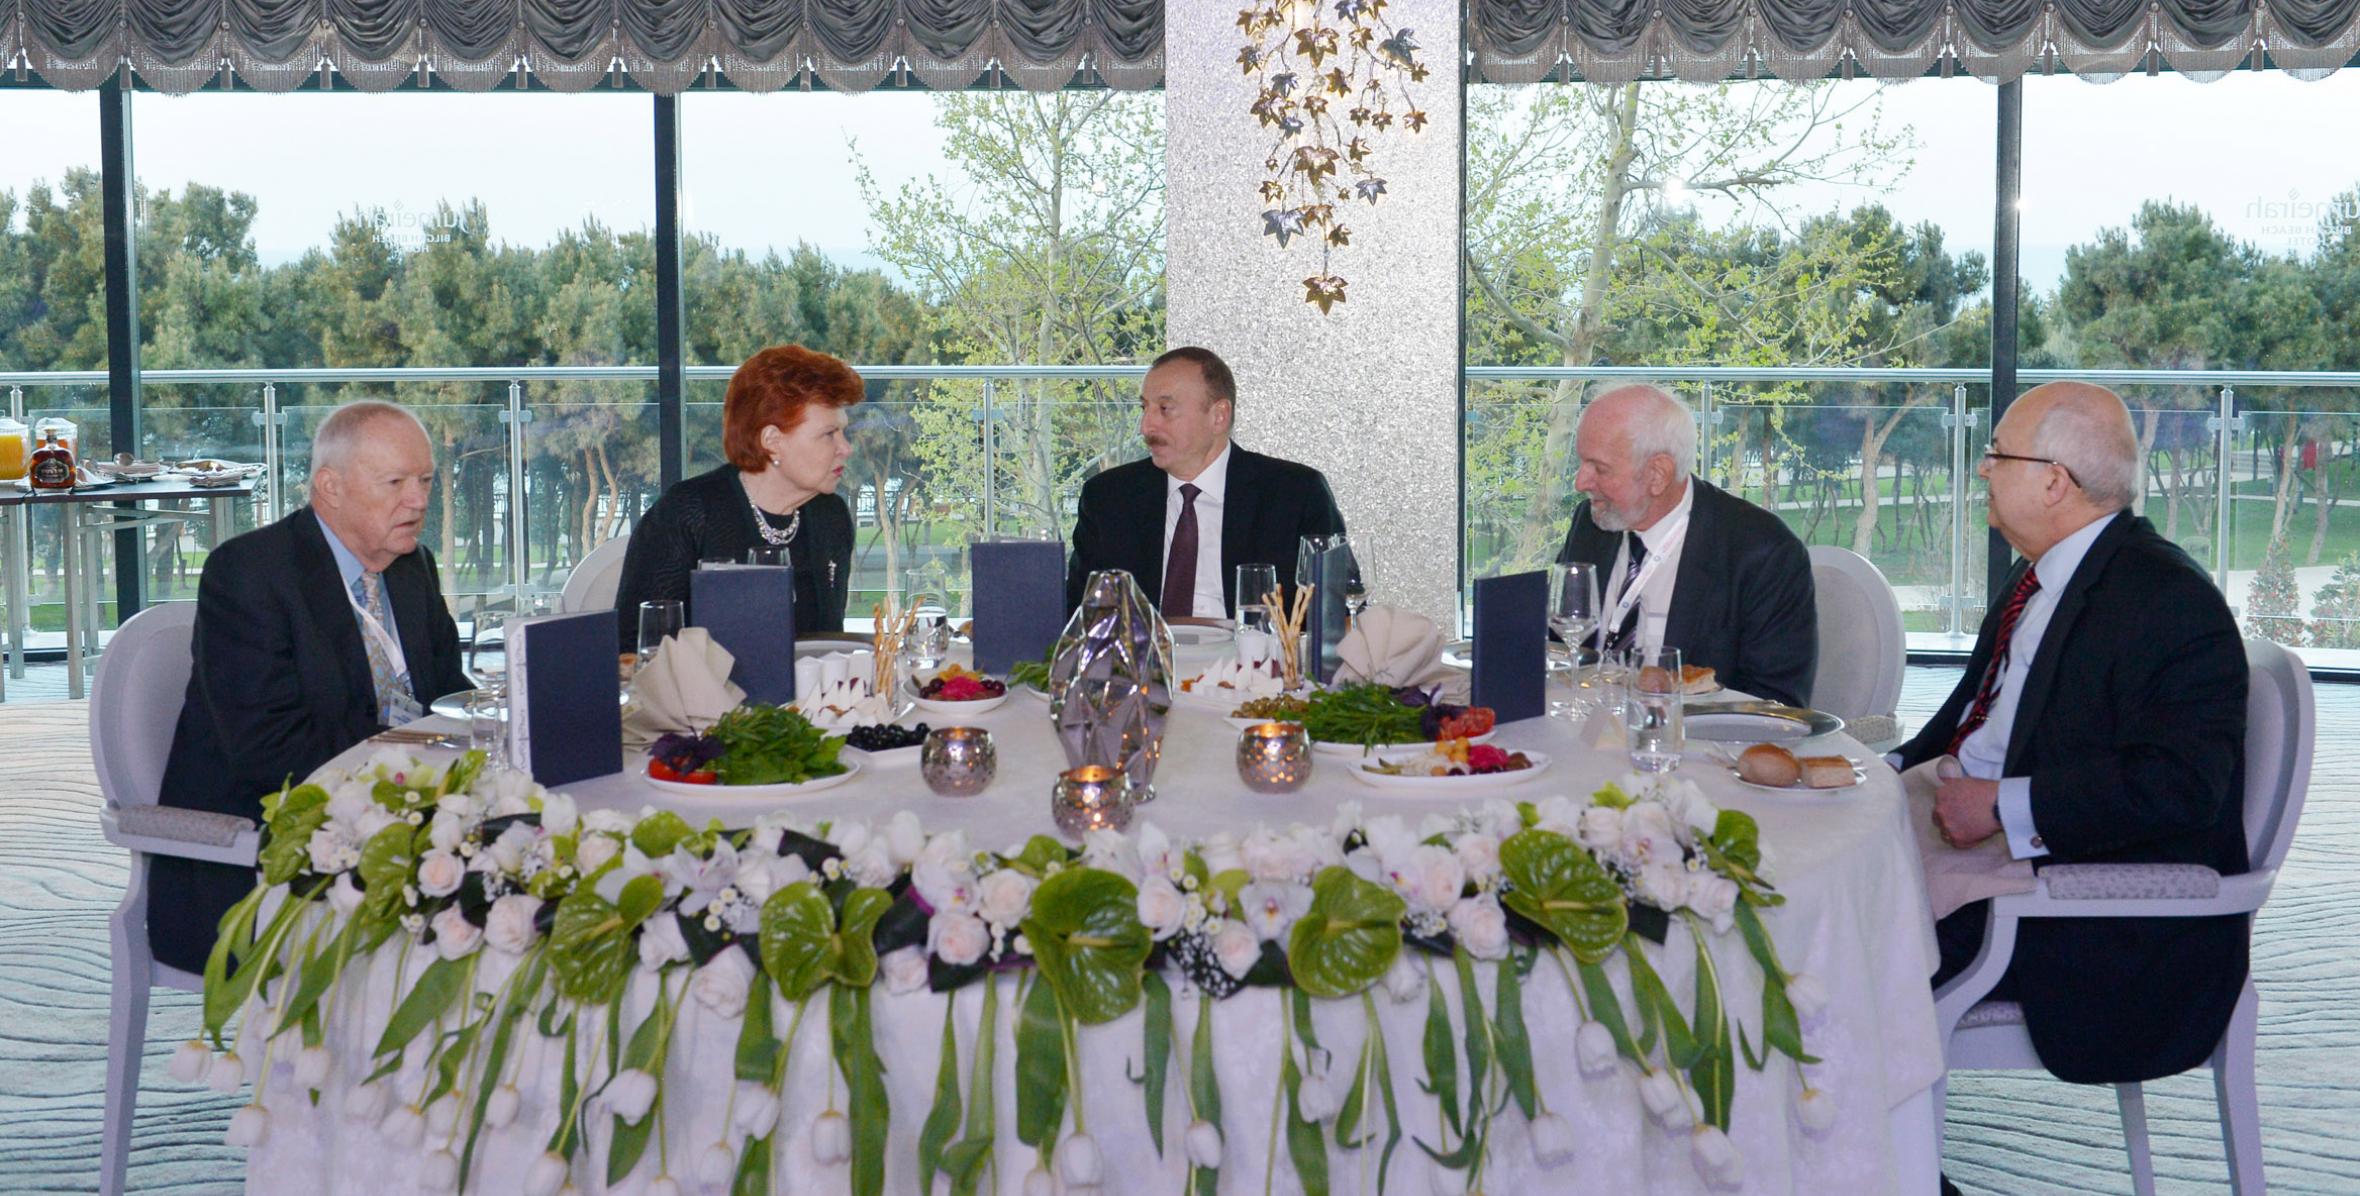 Ilham Aliyev attended the lunch held for the participants of the 2nd Global Shared Societies Forum